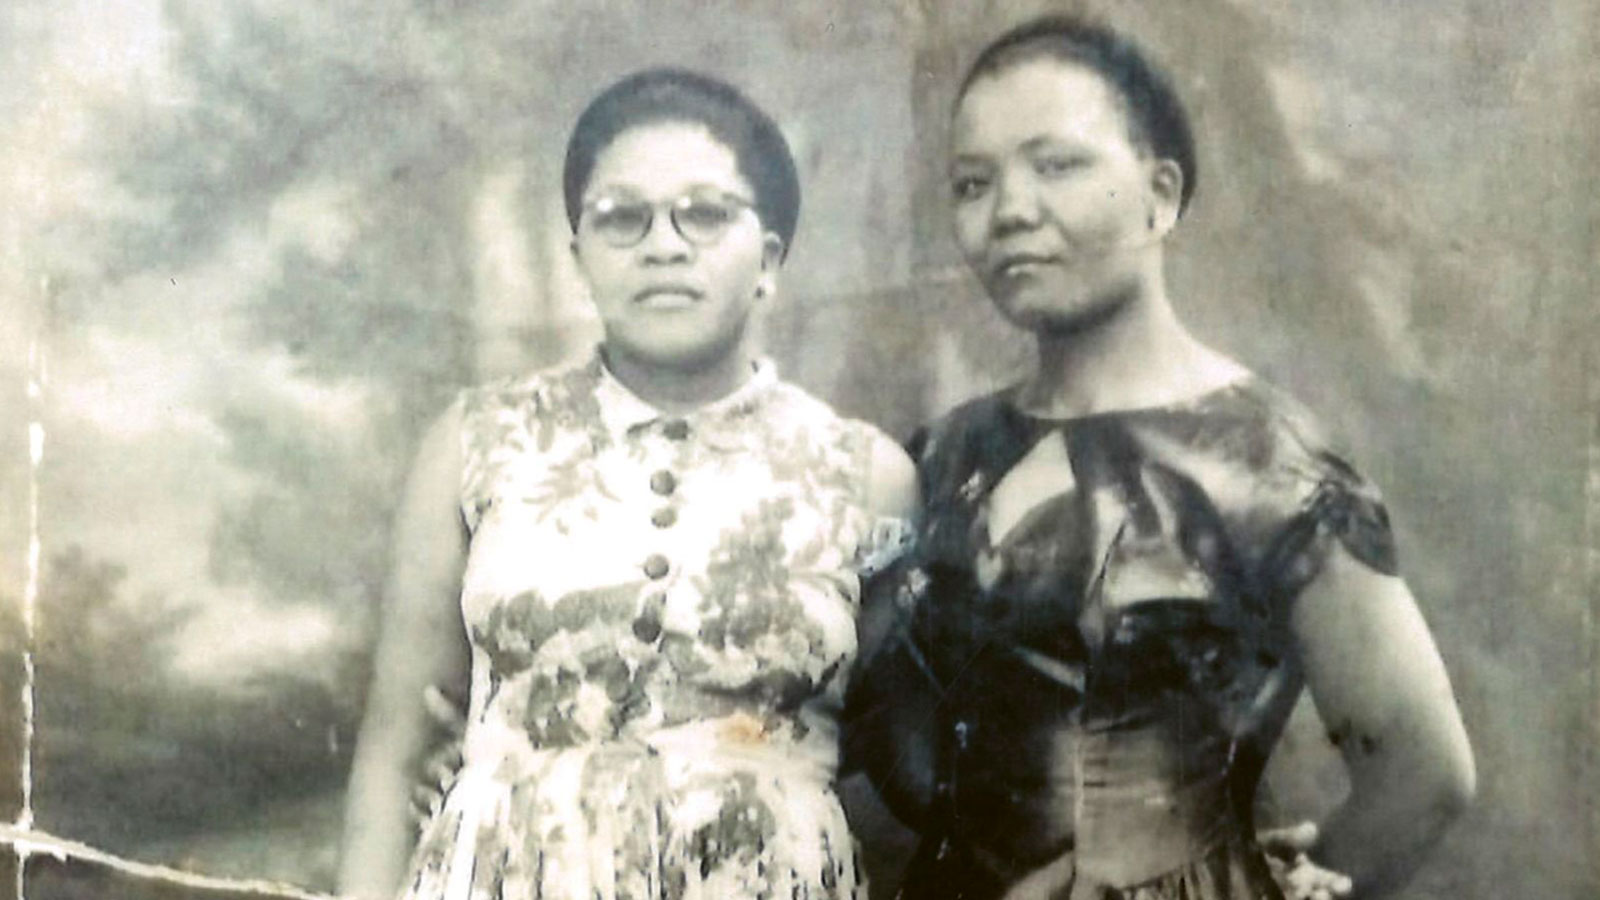 Nelson Mandela's sisters, Baliwe and Makhutswana. "Both my aunts were present figures in our lives and actually lived with us for a time," said Dr. Mandela. "When my parents divorced, they both assisted my mother with the moving process to the Eastern Cape. So even though they were my father's sisters they continued their close relationship with my mother and us and were very supportive to my mother. My Aunt Baliwe was very brave and outspoken and marched to the beat of her own drum. Lots of relatives say that I have the same temperament as her."